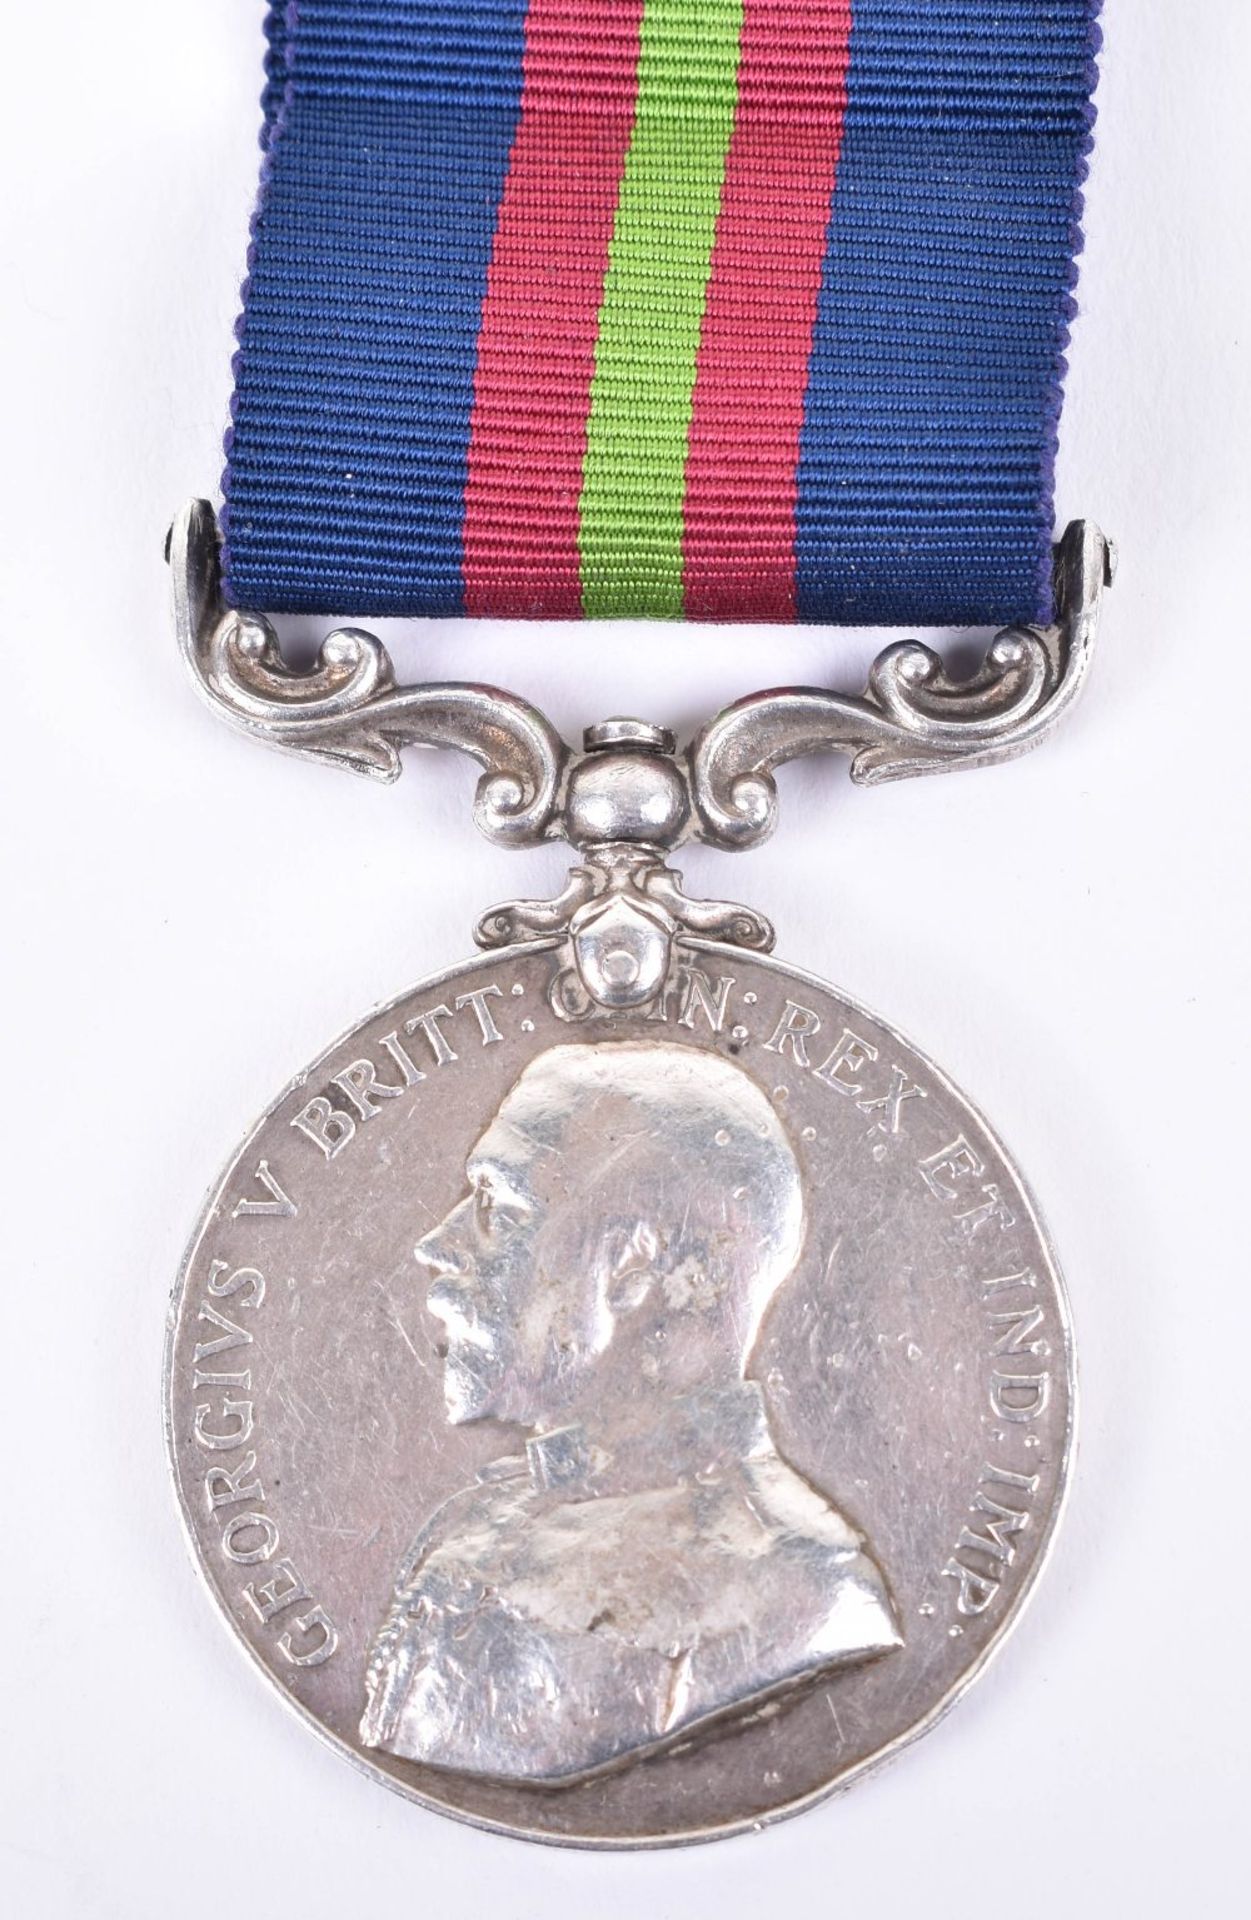 Great War King’s African Rifles Distinguished Conduct Medal Awarded for Gallantry in Portuguese East